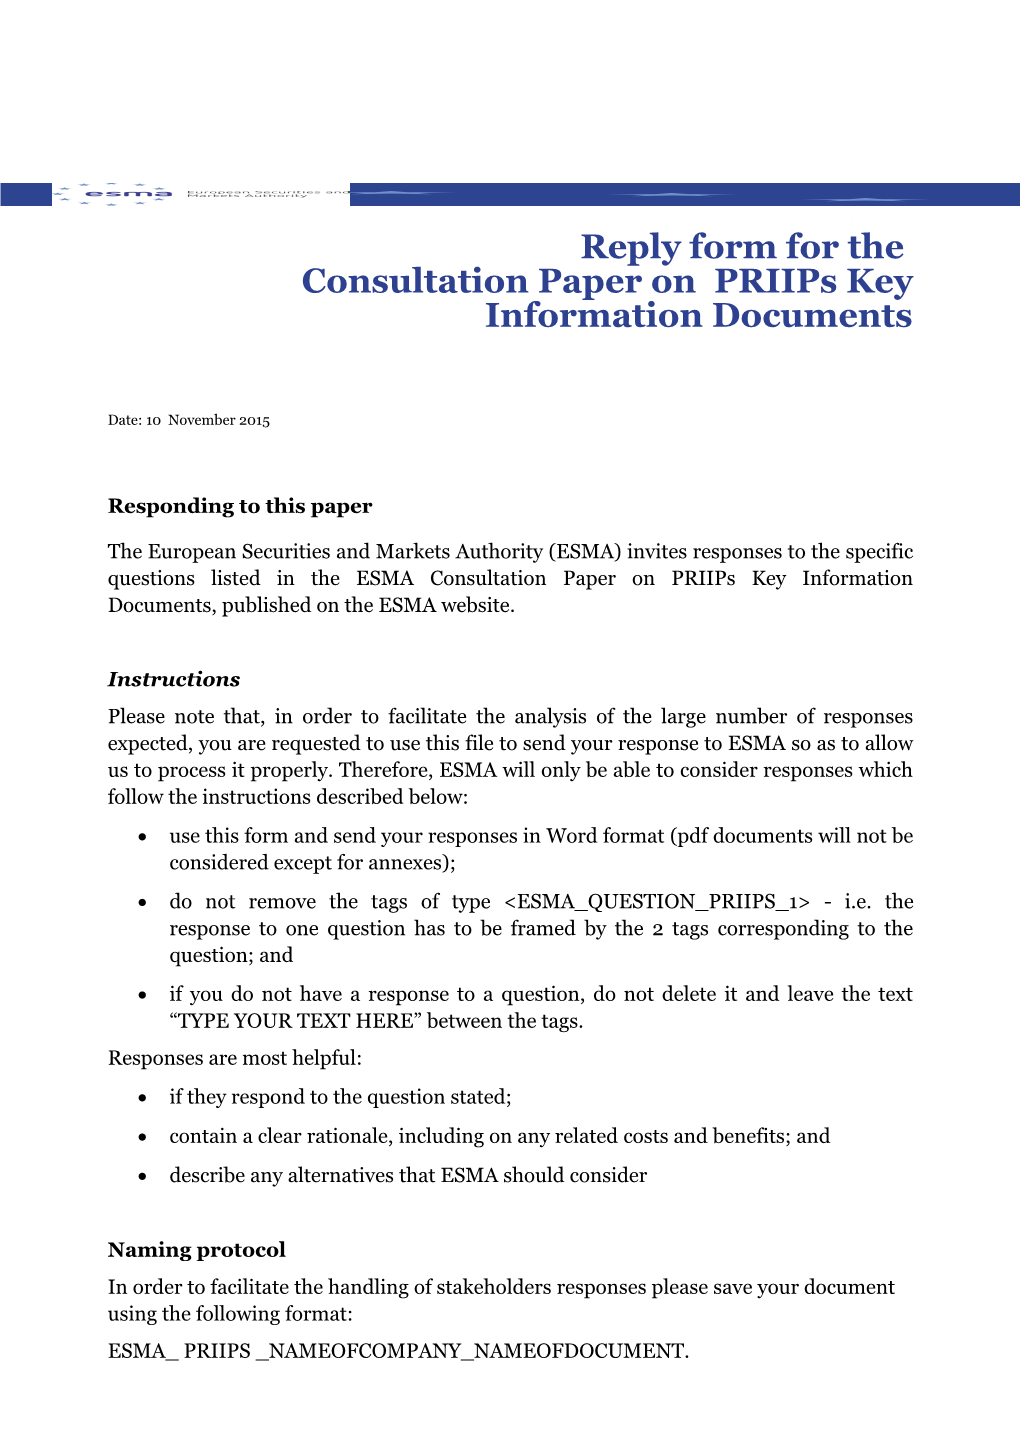 Reply Form for the Mifid II/Mifir Consultation Paper s1